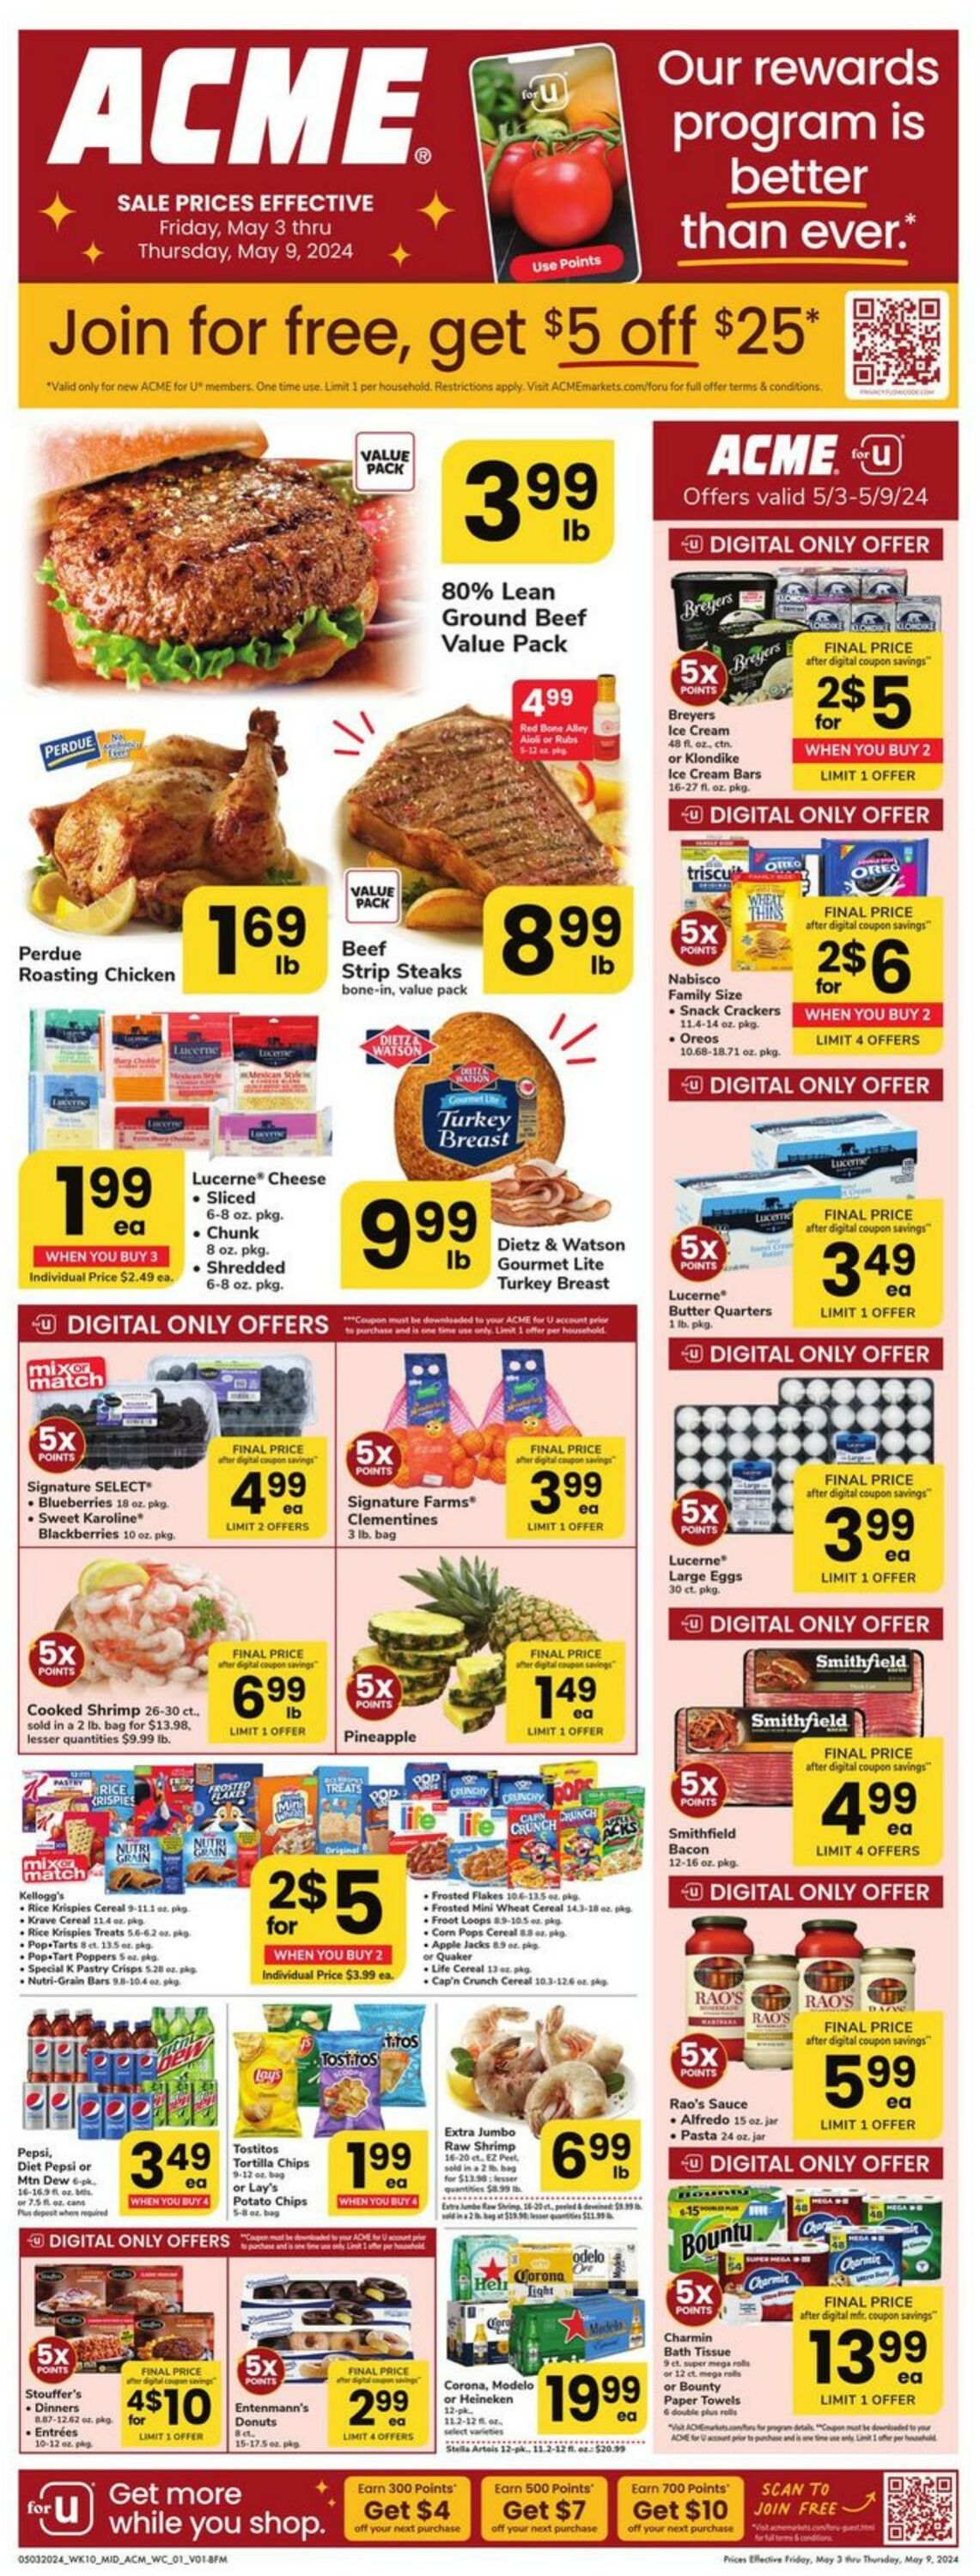 Acme Promotional weekly ads